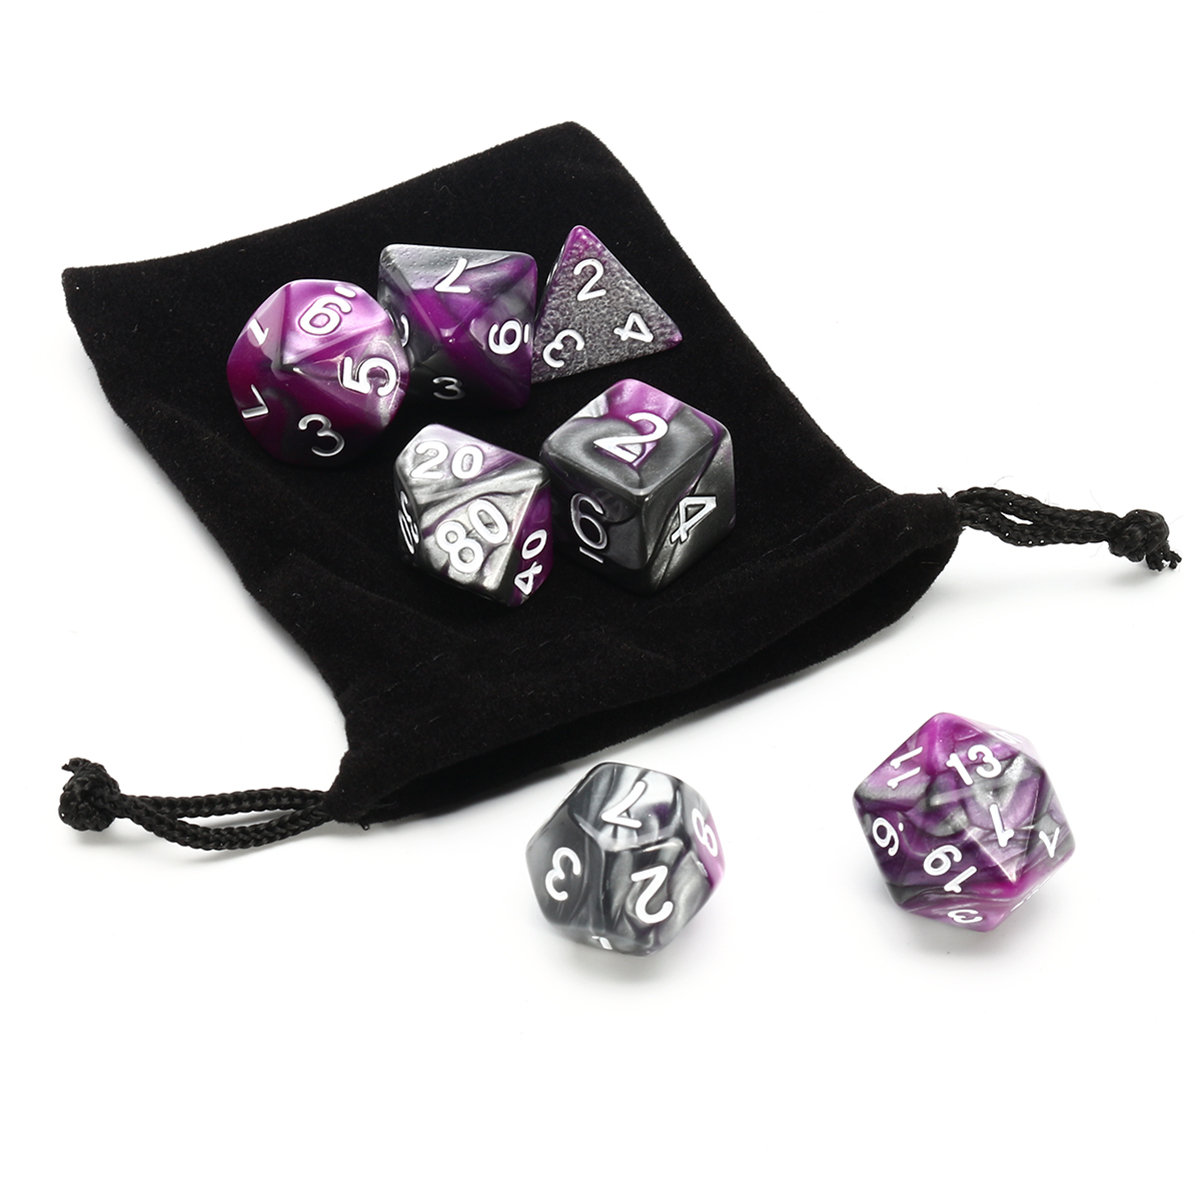 7Pcs-Purple-Gemini-Acrylic-Polyhedral-Dice-For-Dungeons-Dragons-RPG-RPG-With-Bag-1303425-1